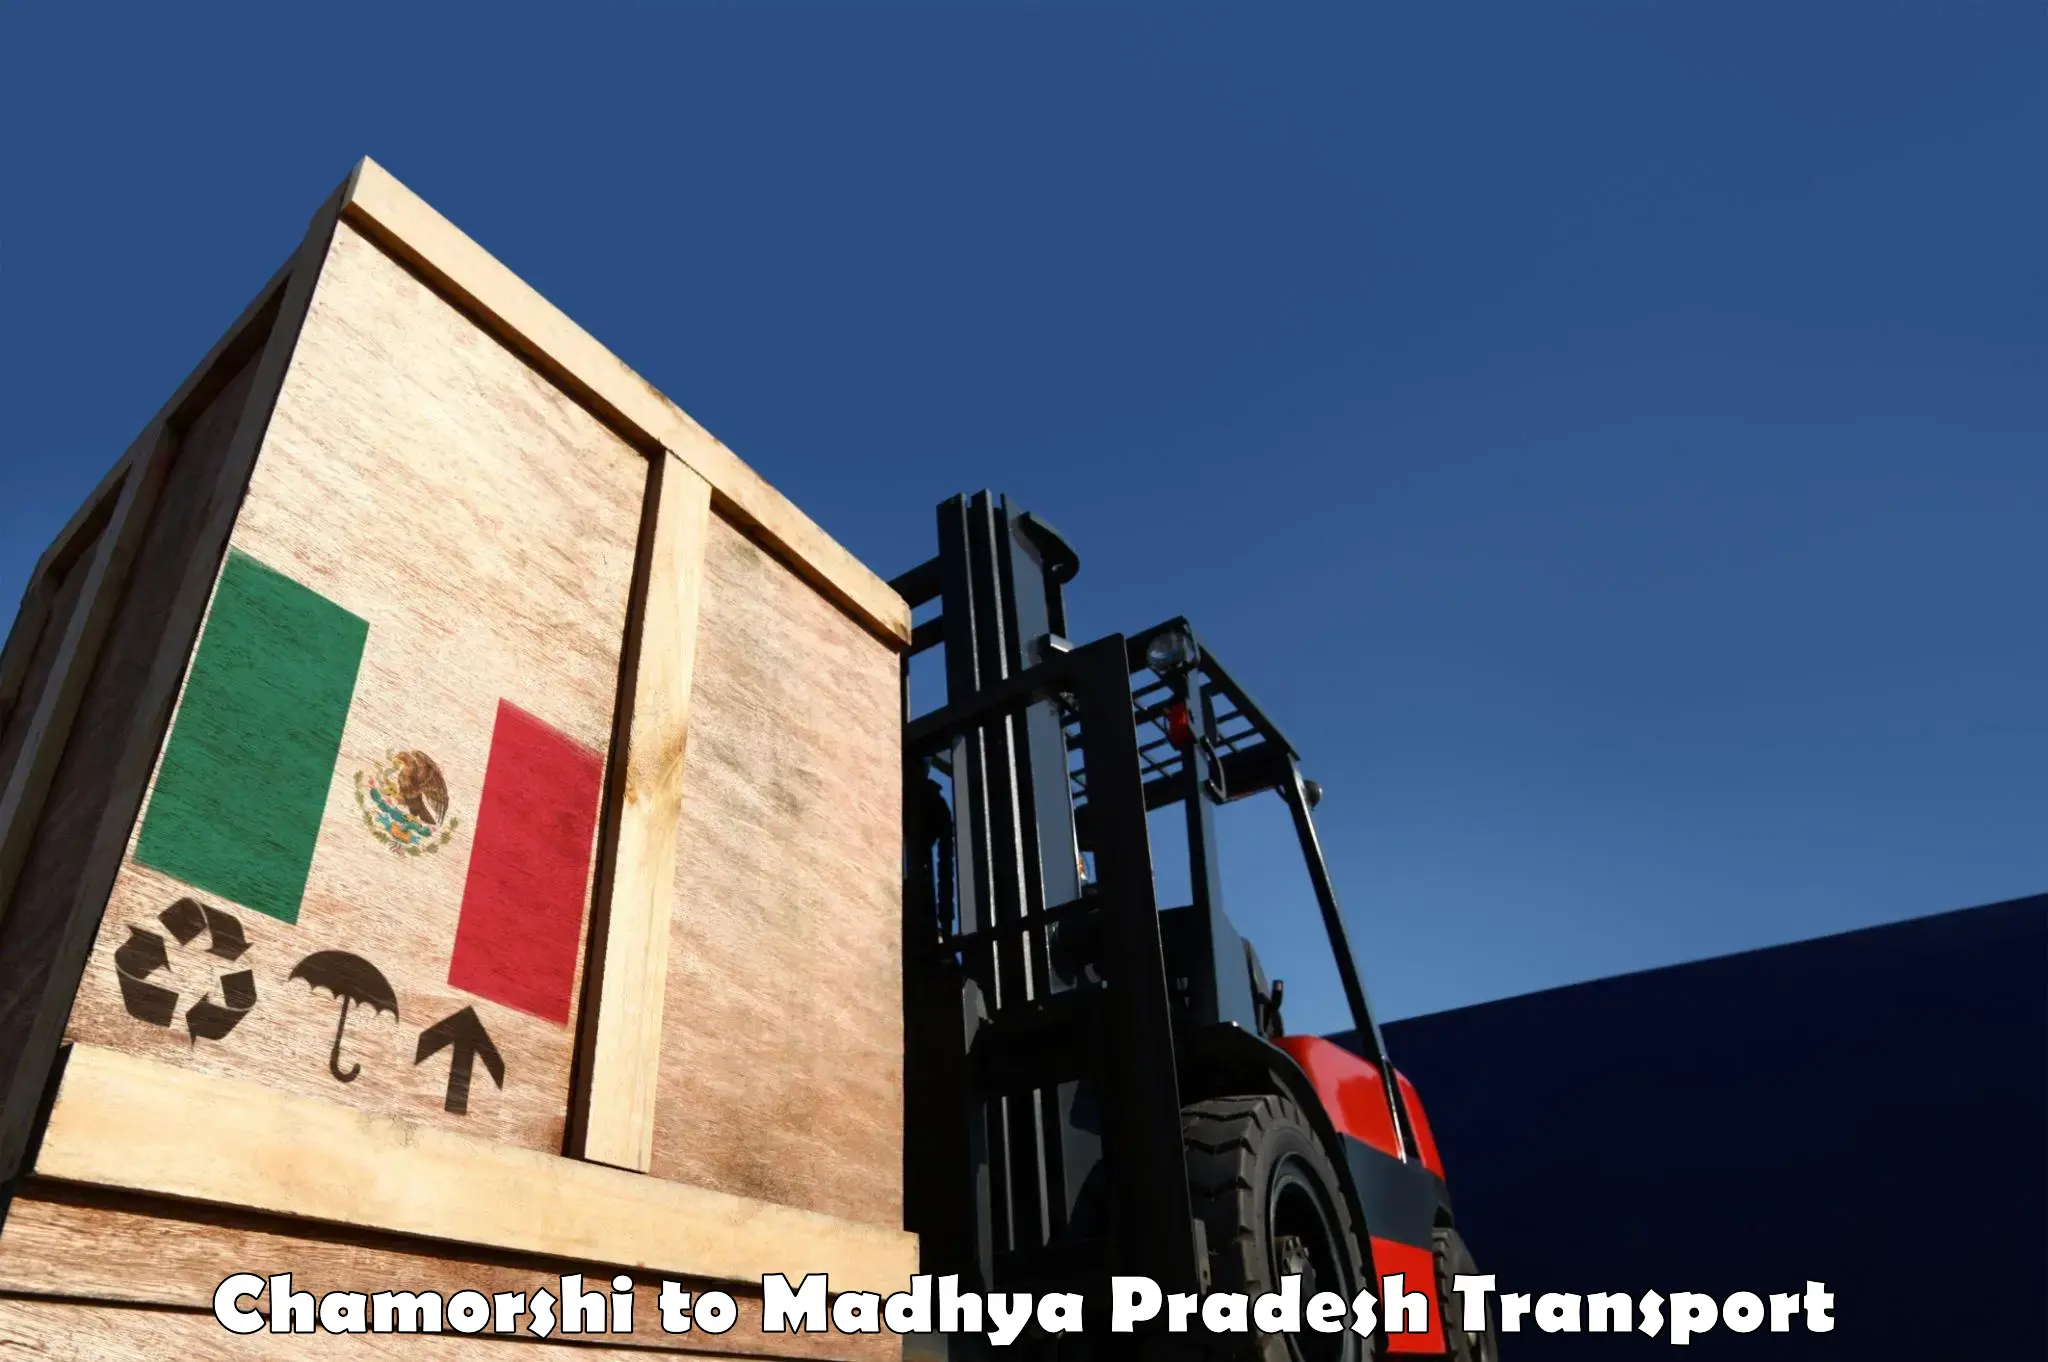 Vehicle transport services in Chamorshi to Panna